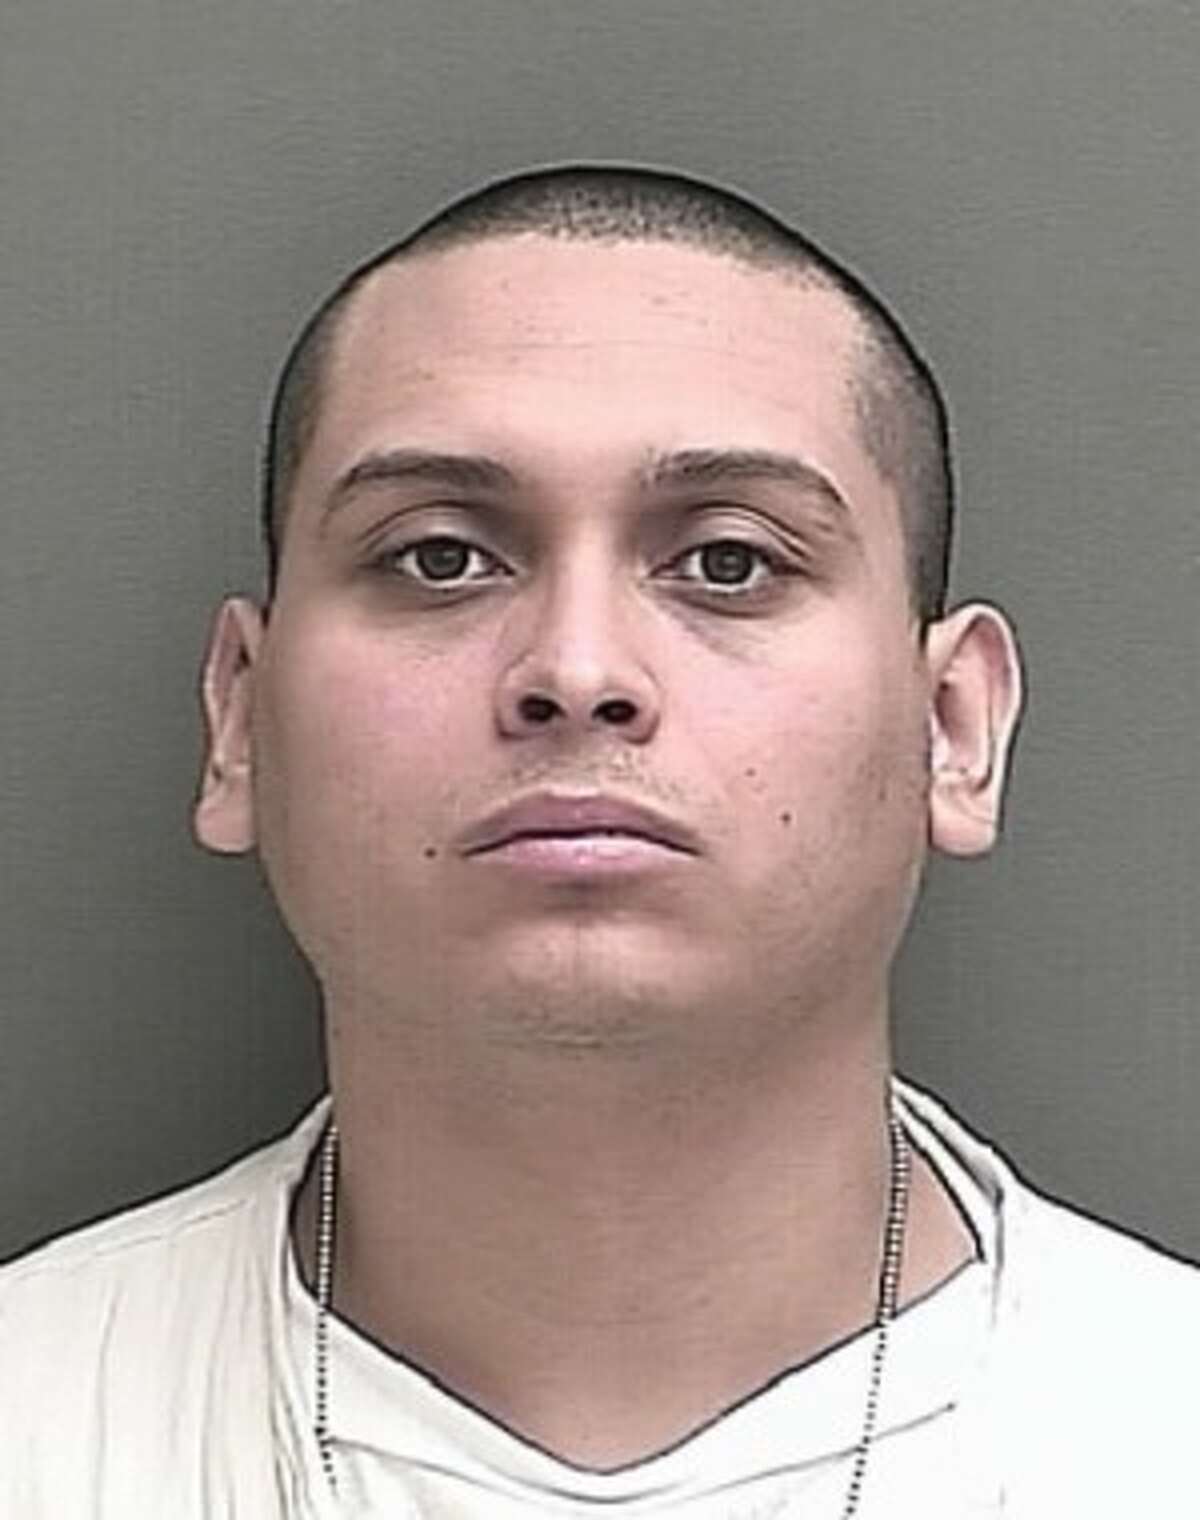 Surenos Trece Gang Member Wanted By Texas Police For Failing To Register As A Sex Offender